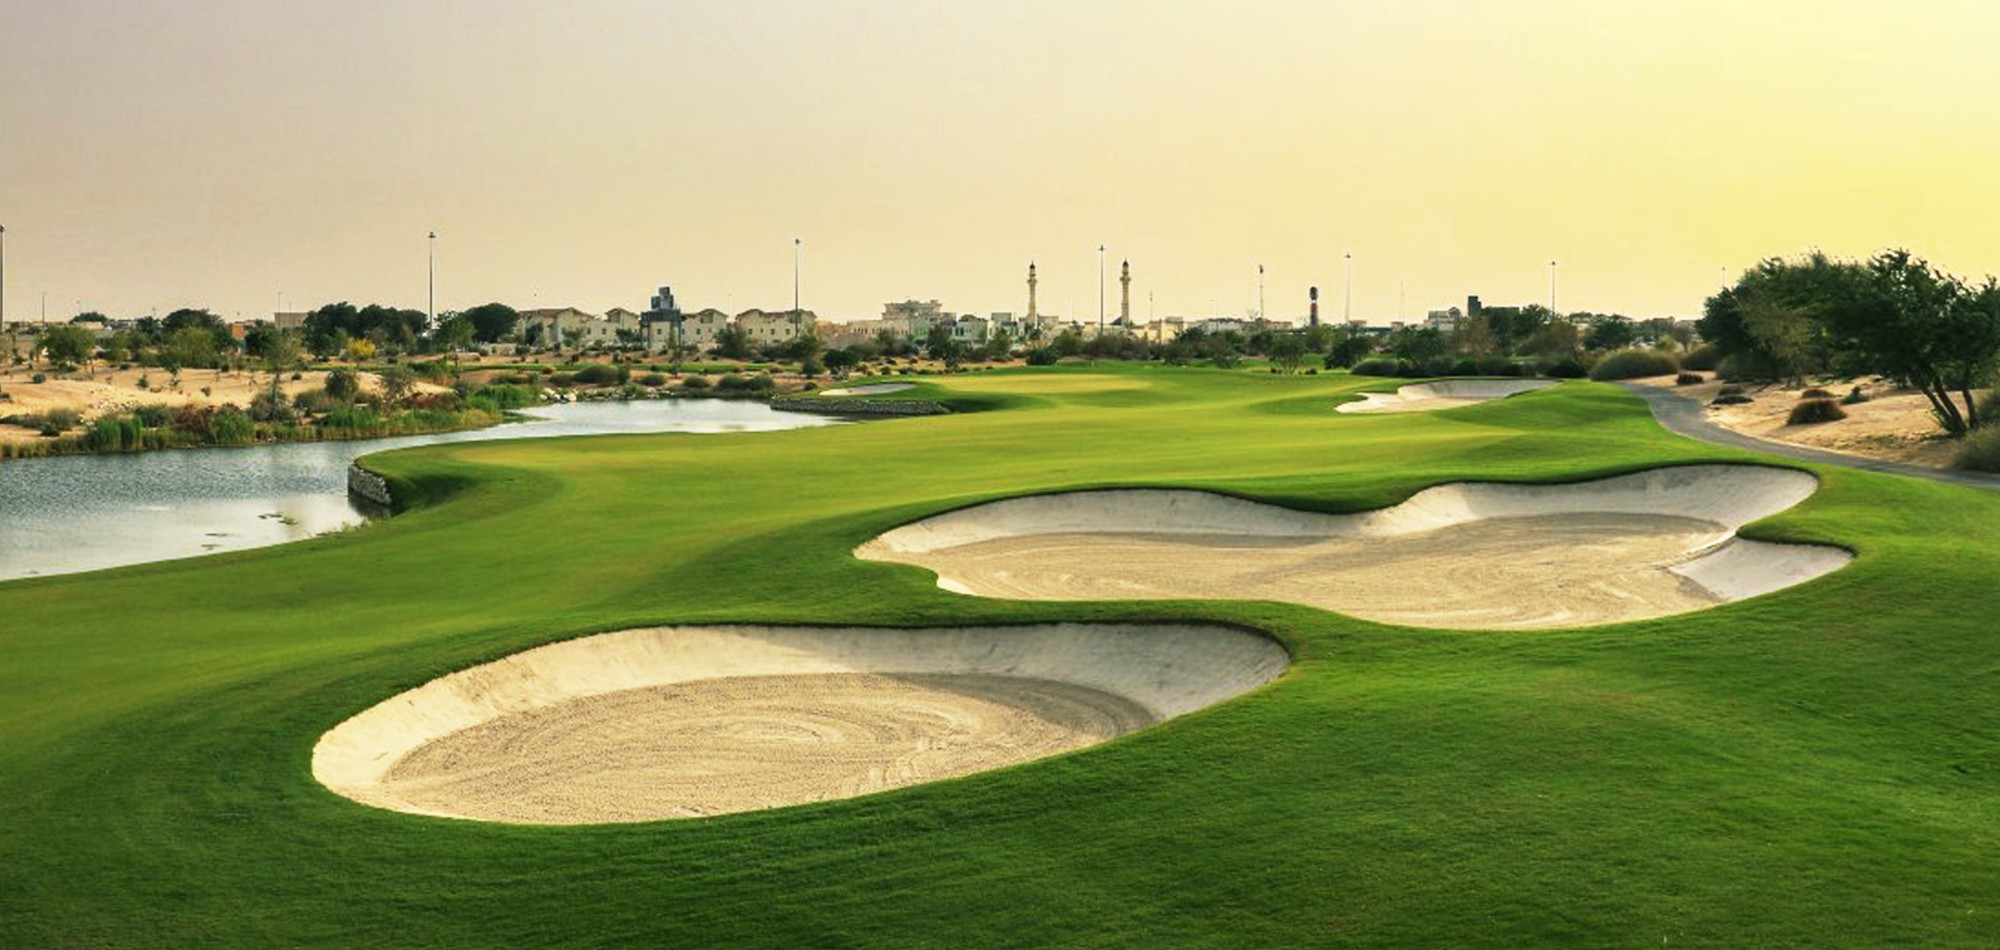 Commercial Bank, ECGC mark grand success of Qatar Masters